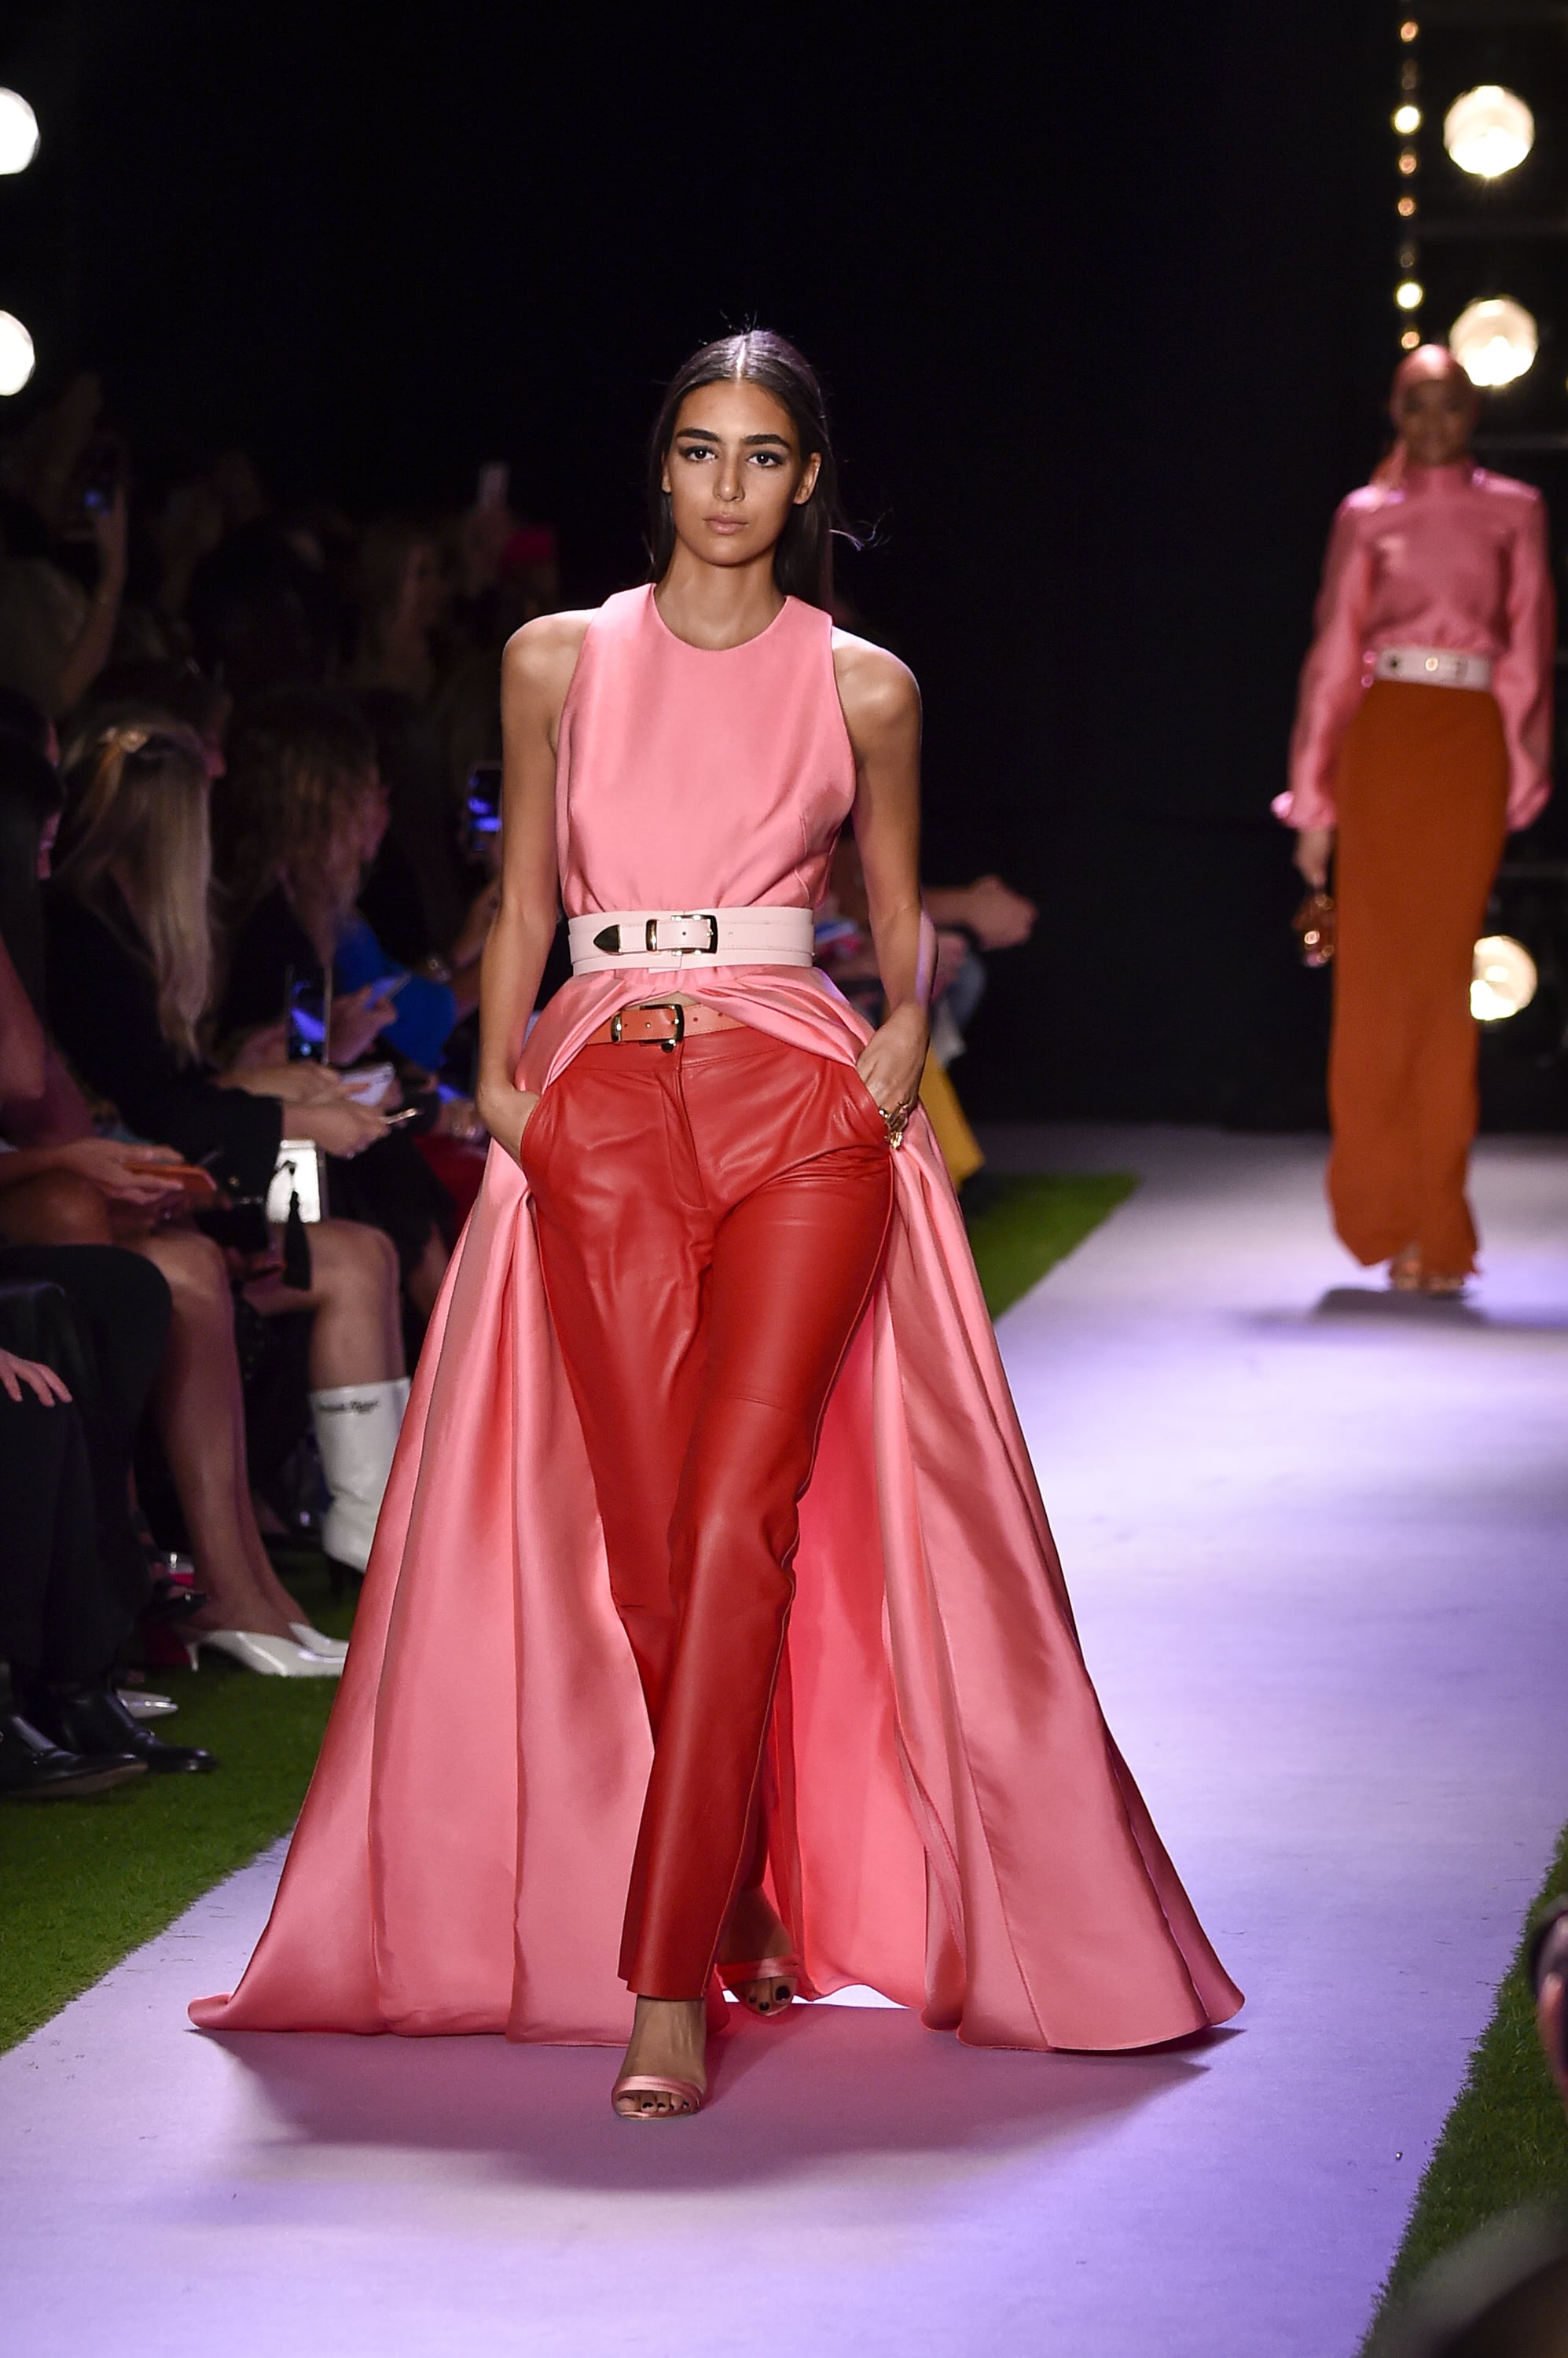 A Pink Dress Over Pants on the Brandon Maxwell Runway during New